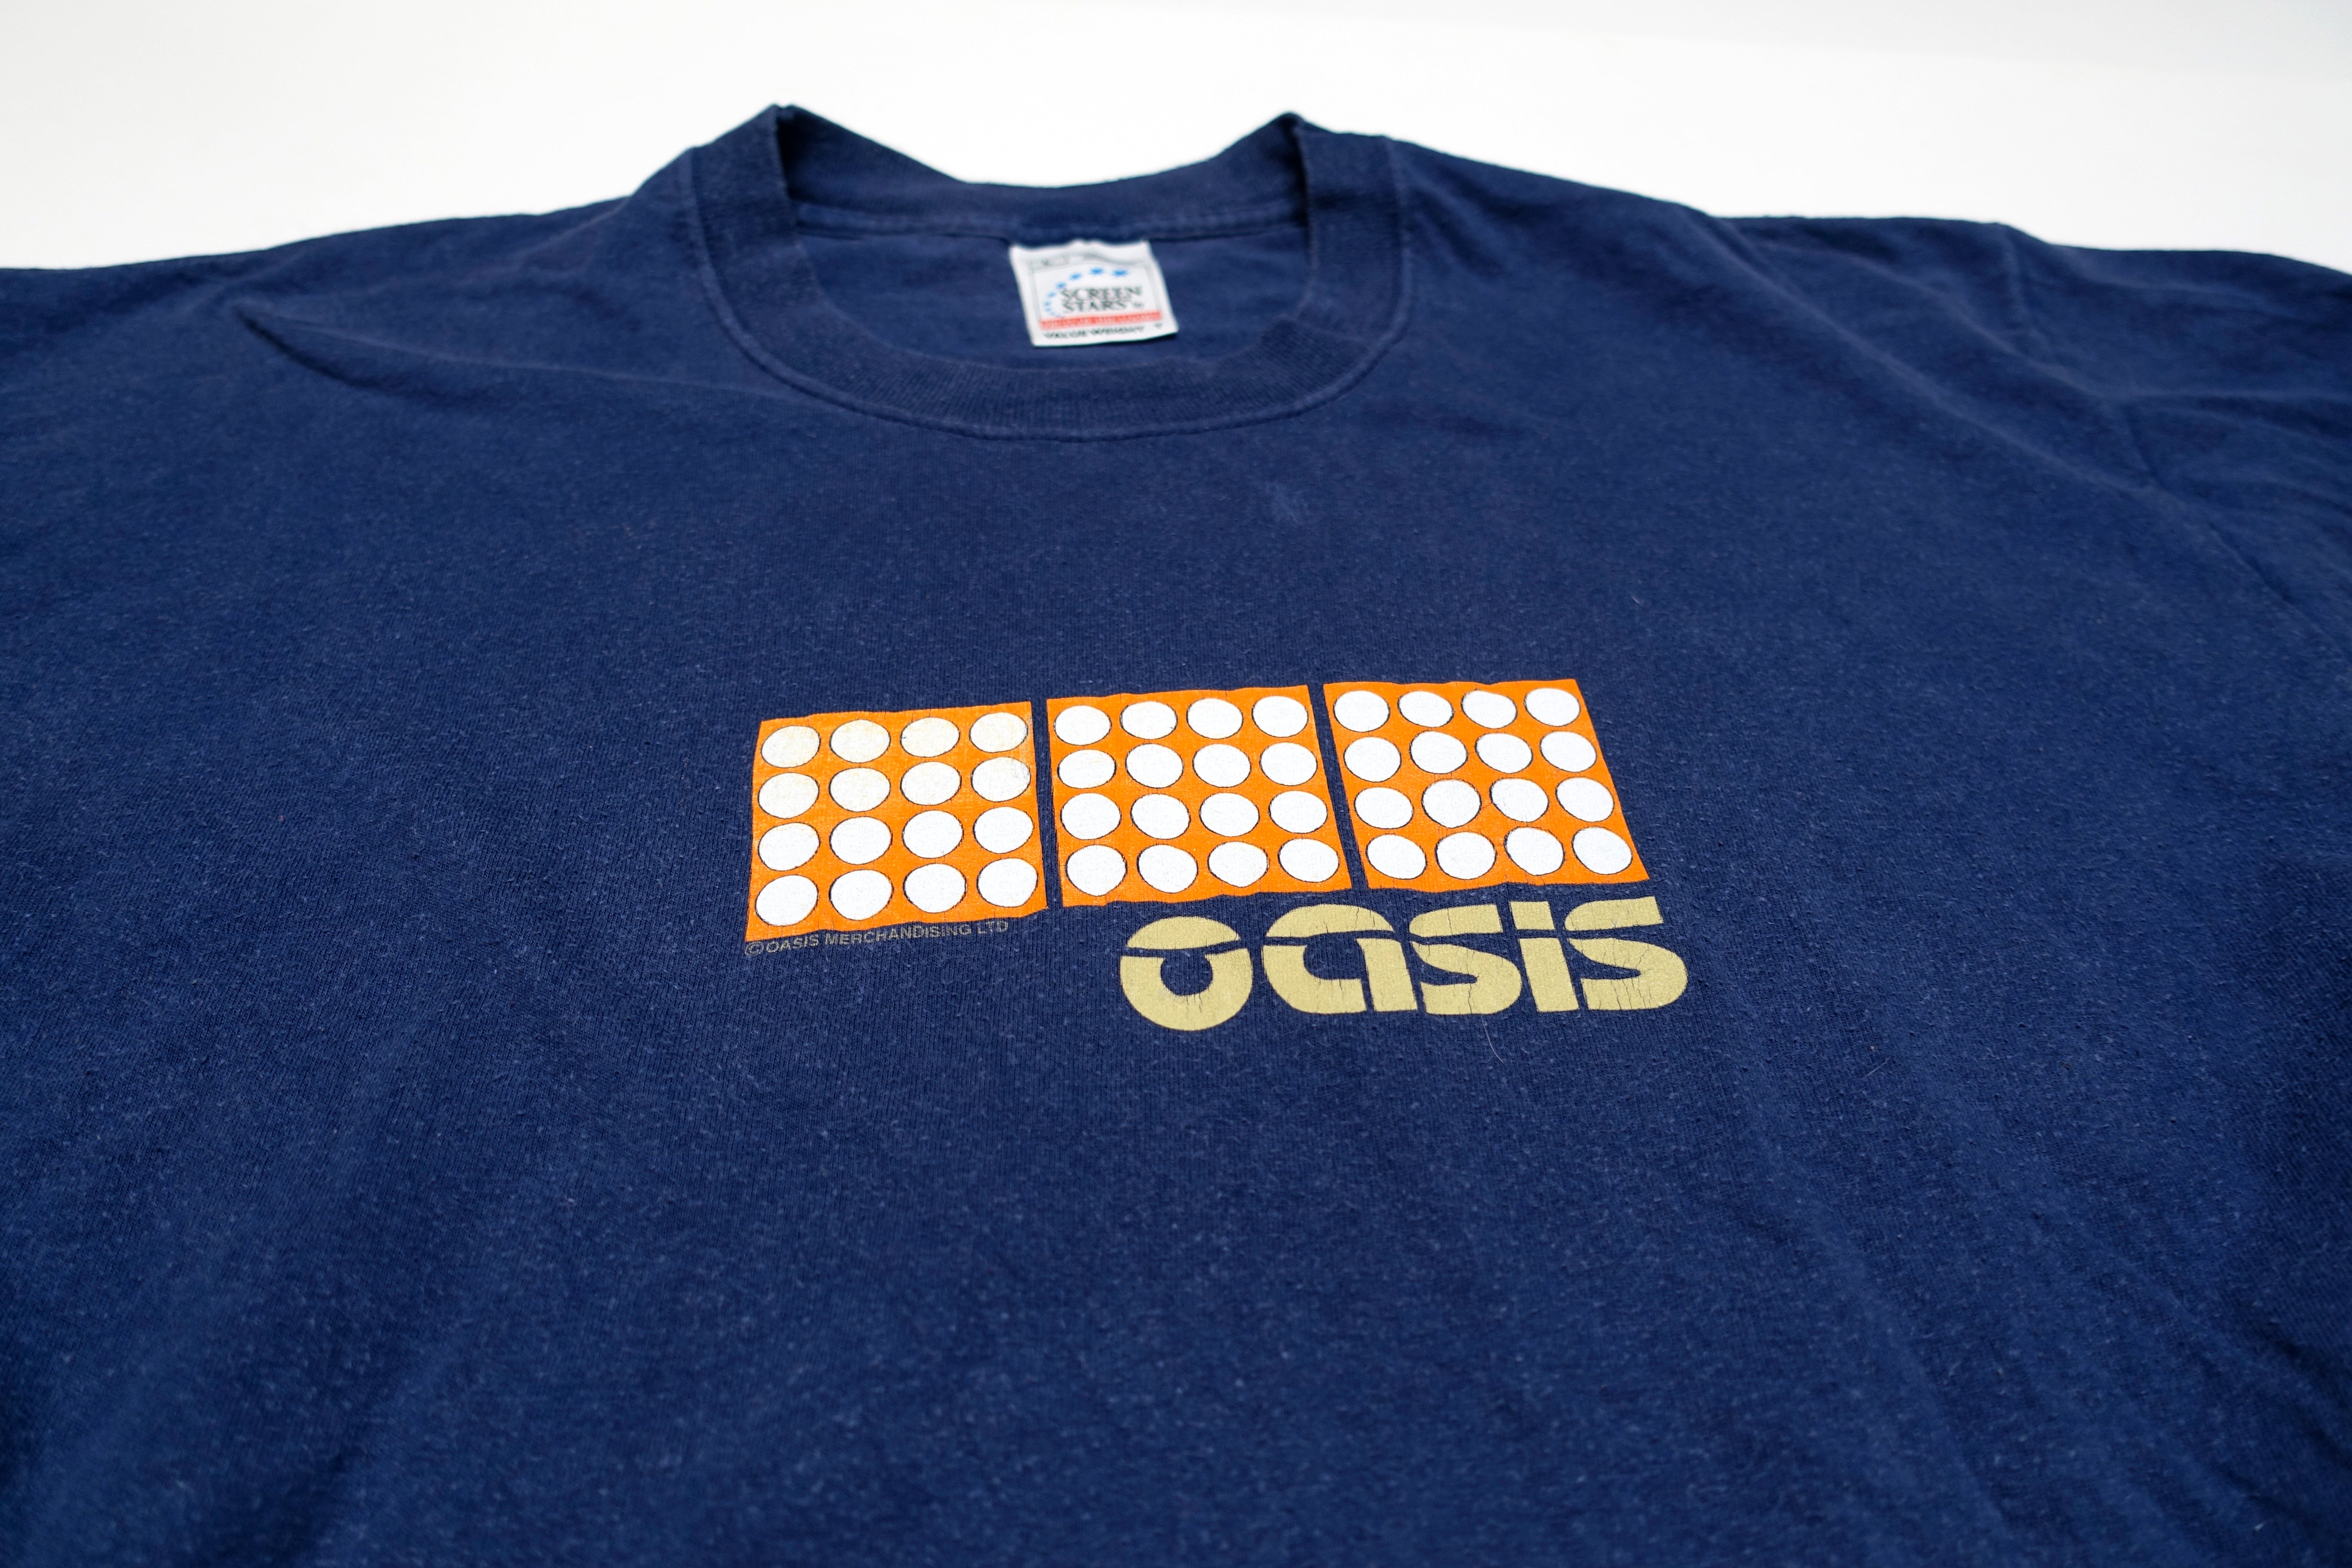 Oasis - Blocks / Standing On The Shoulders Of Giants 2000 Tour Shirt Size Large